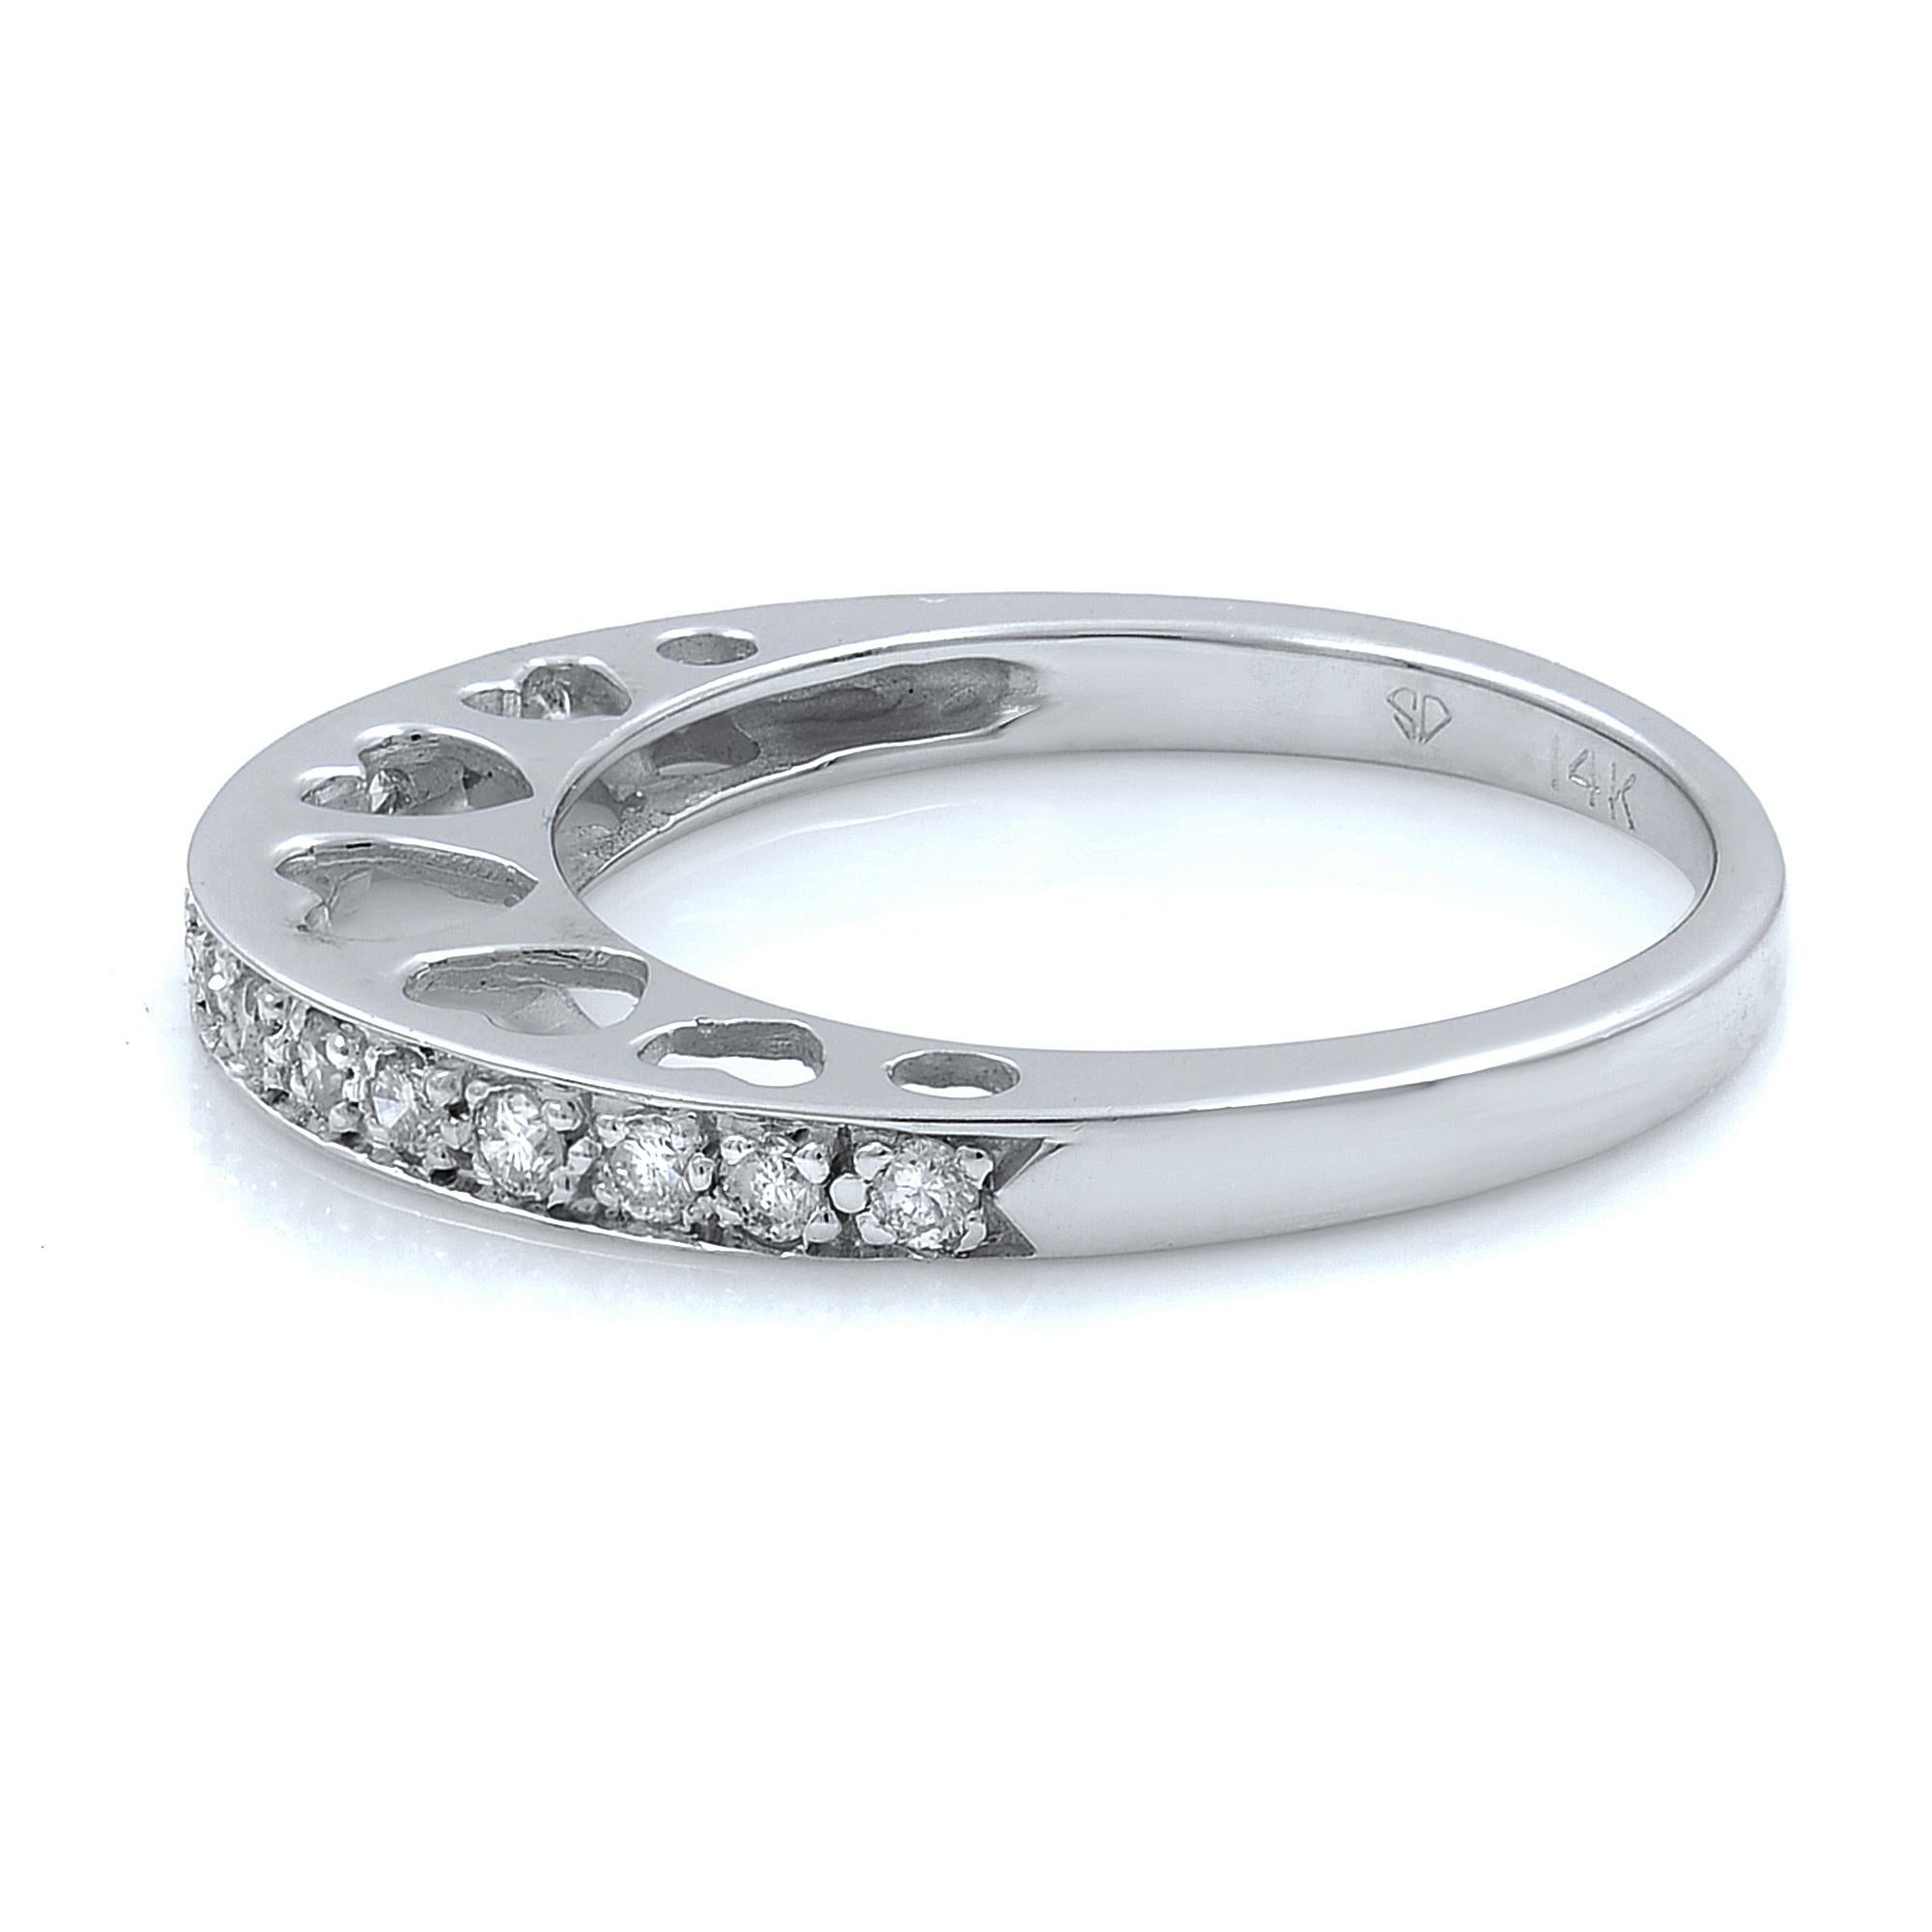 This is a delicate and sparkly 14k diamond inset heart cut-out wedding band ring. The ring is set with 0.50cts of round cut diamonds. The width of the band is 2.60mm. Thickness: 5.50-1.20mm. The ring weighs 3.00 grams, it is size: 6.5. Comes with a